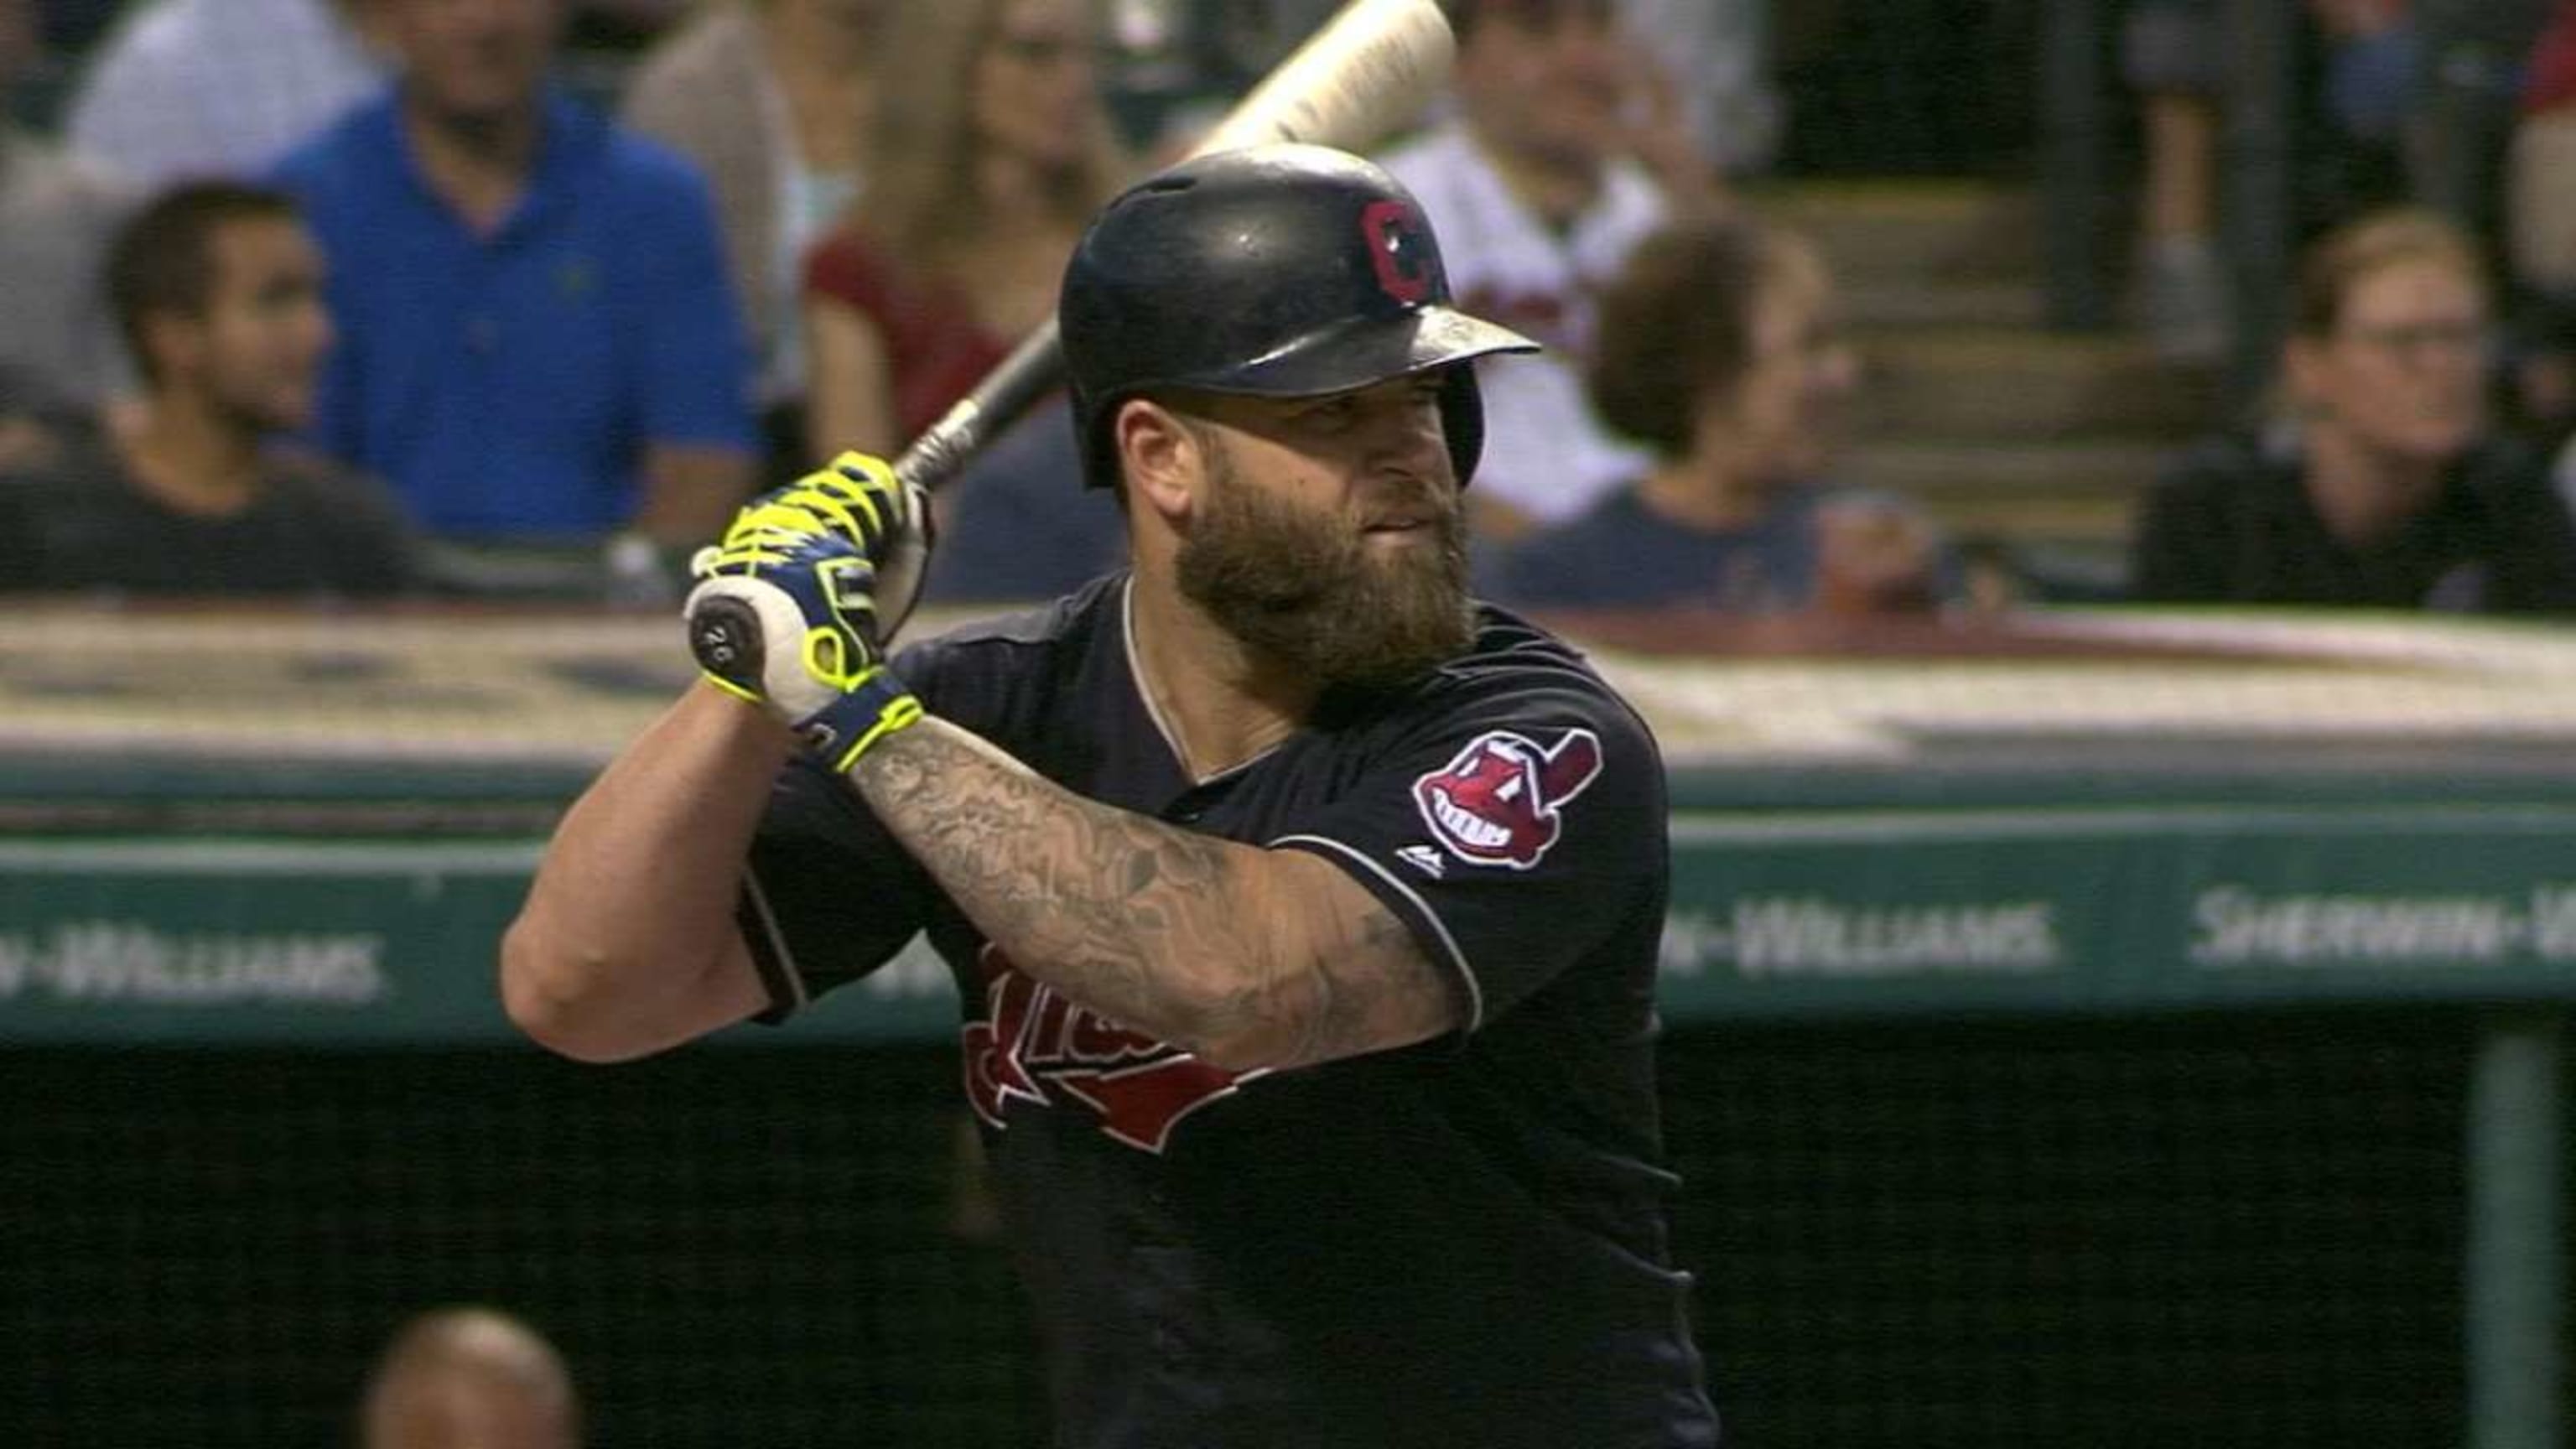 Come one, come all and watch powerful human Mike Napoli hit 5 homers in 5  straight games